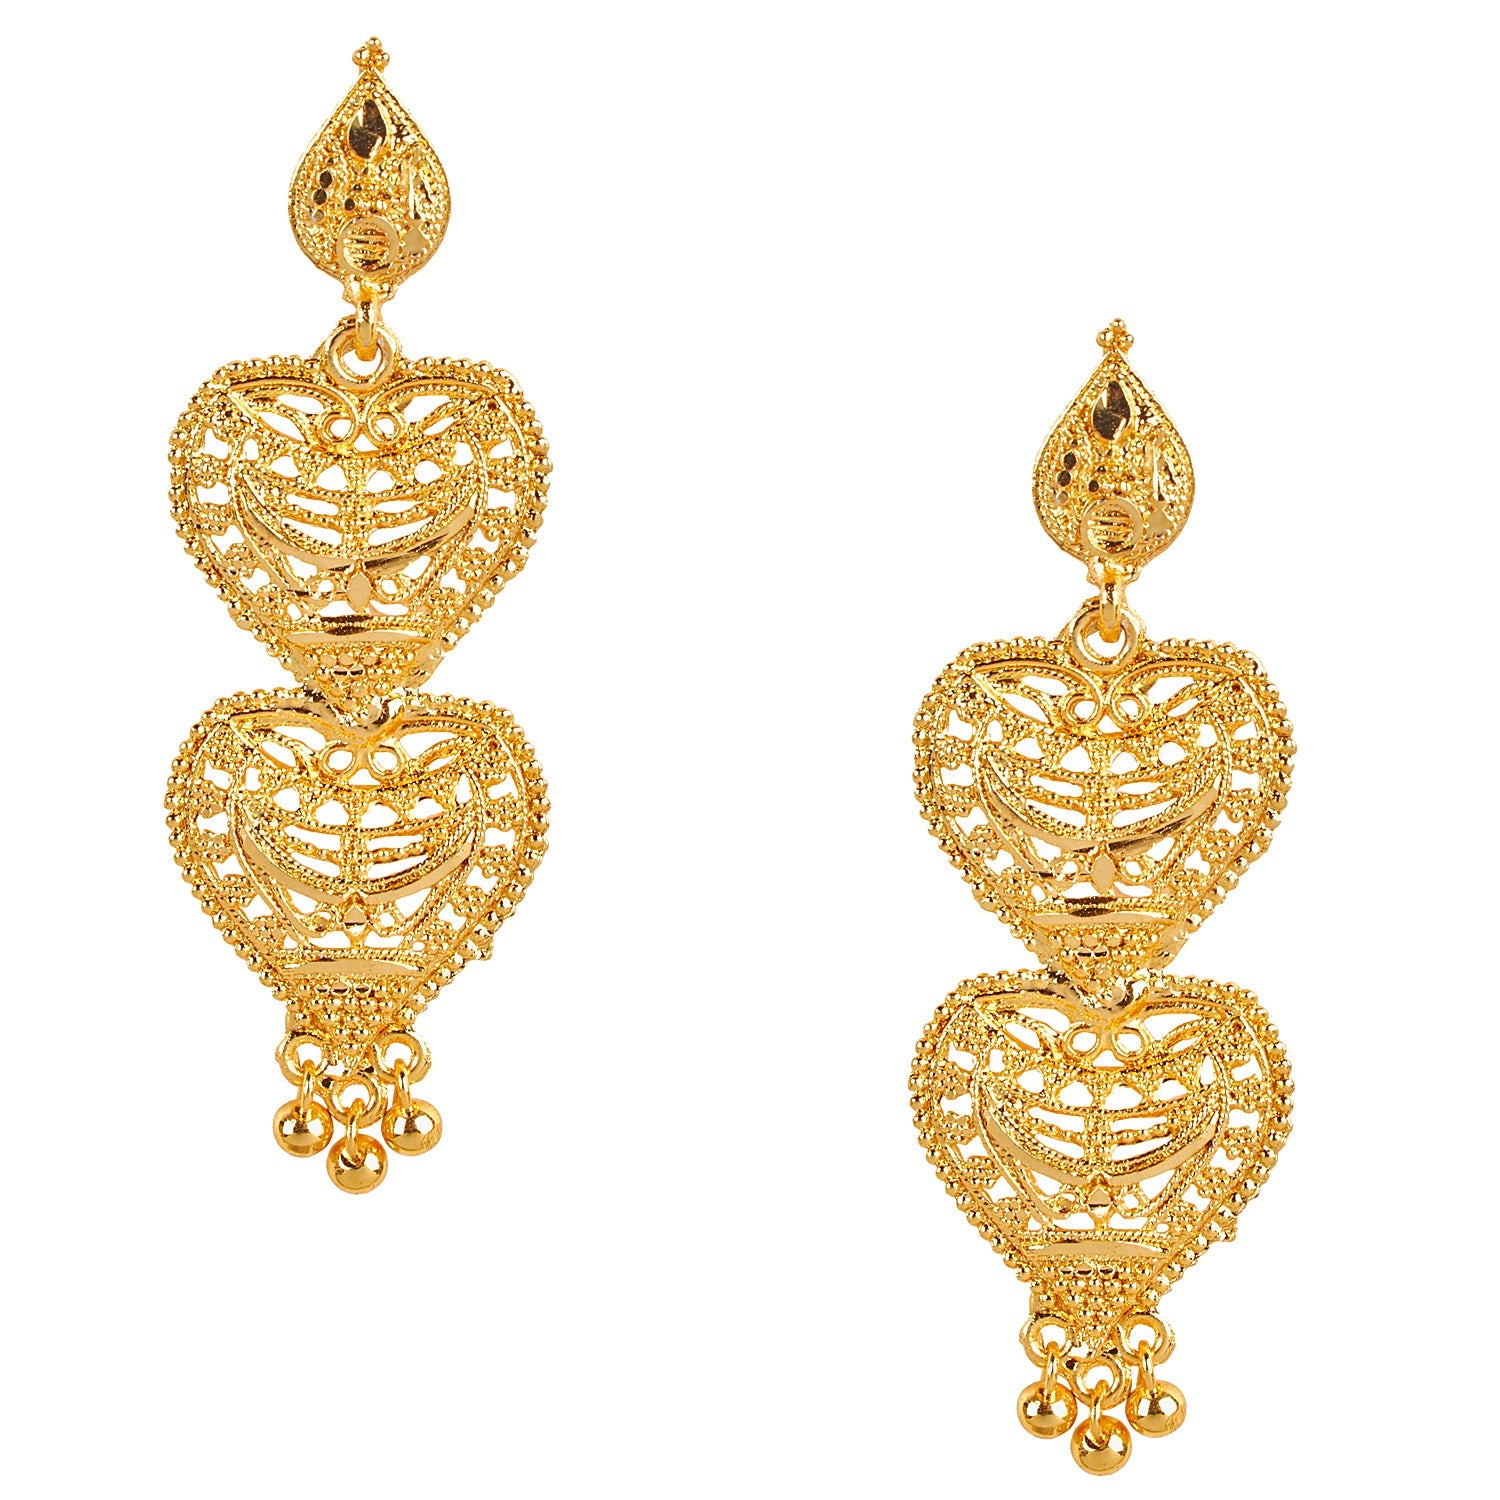 Aggregate more than 108 jewel one gold earrings designs best